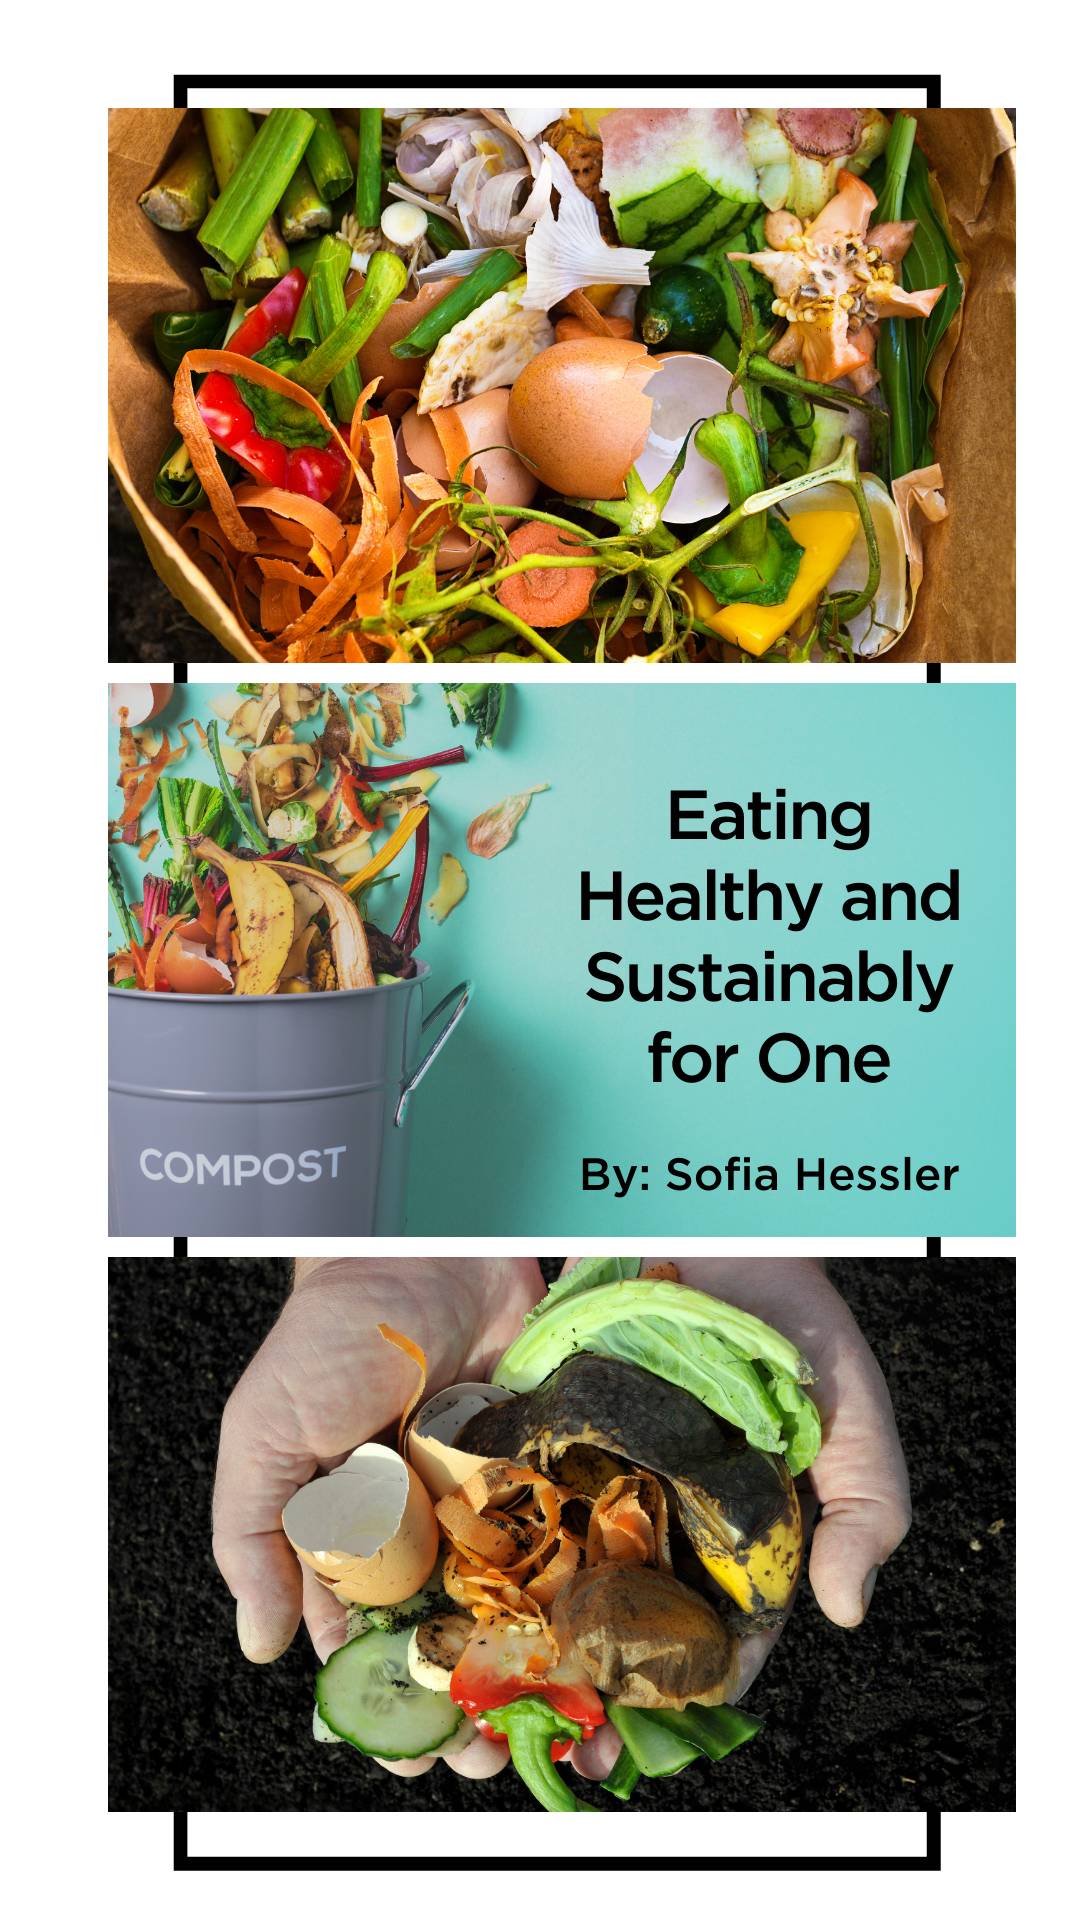 Eating Healthy and Sustainable for One by Sofia Hessler, image of compost